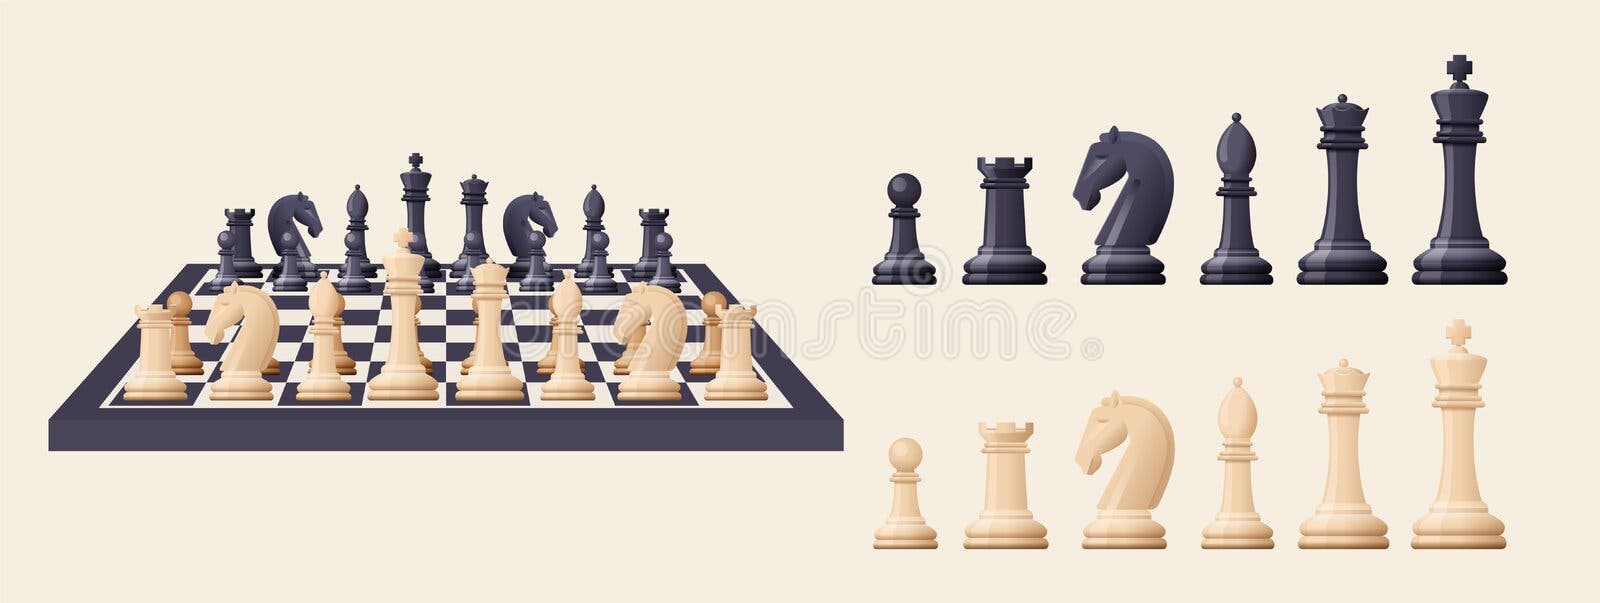 Chess Piece Photos, Download The BEST Free Chess Piece Stock